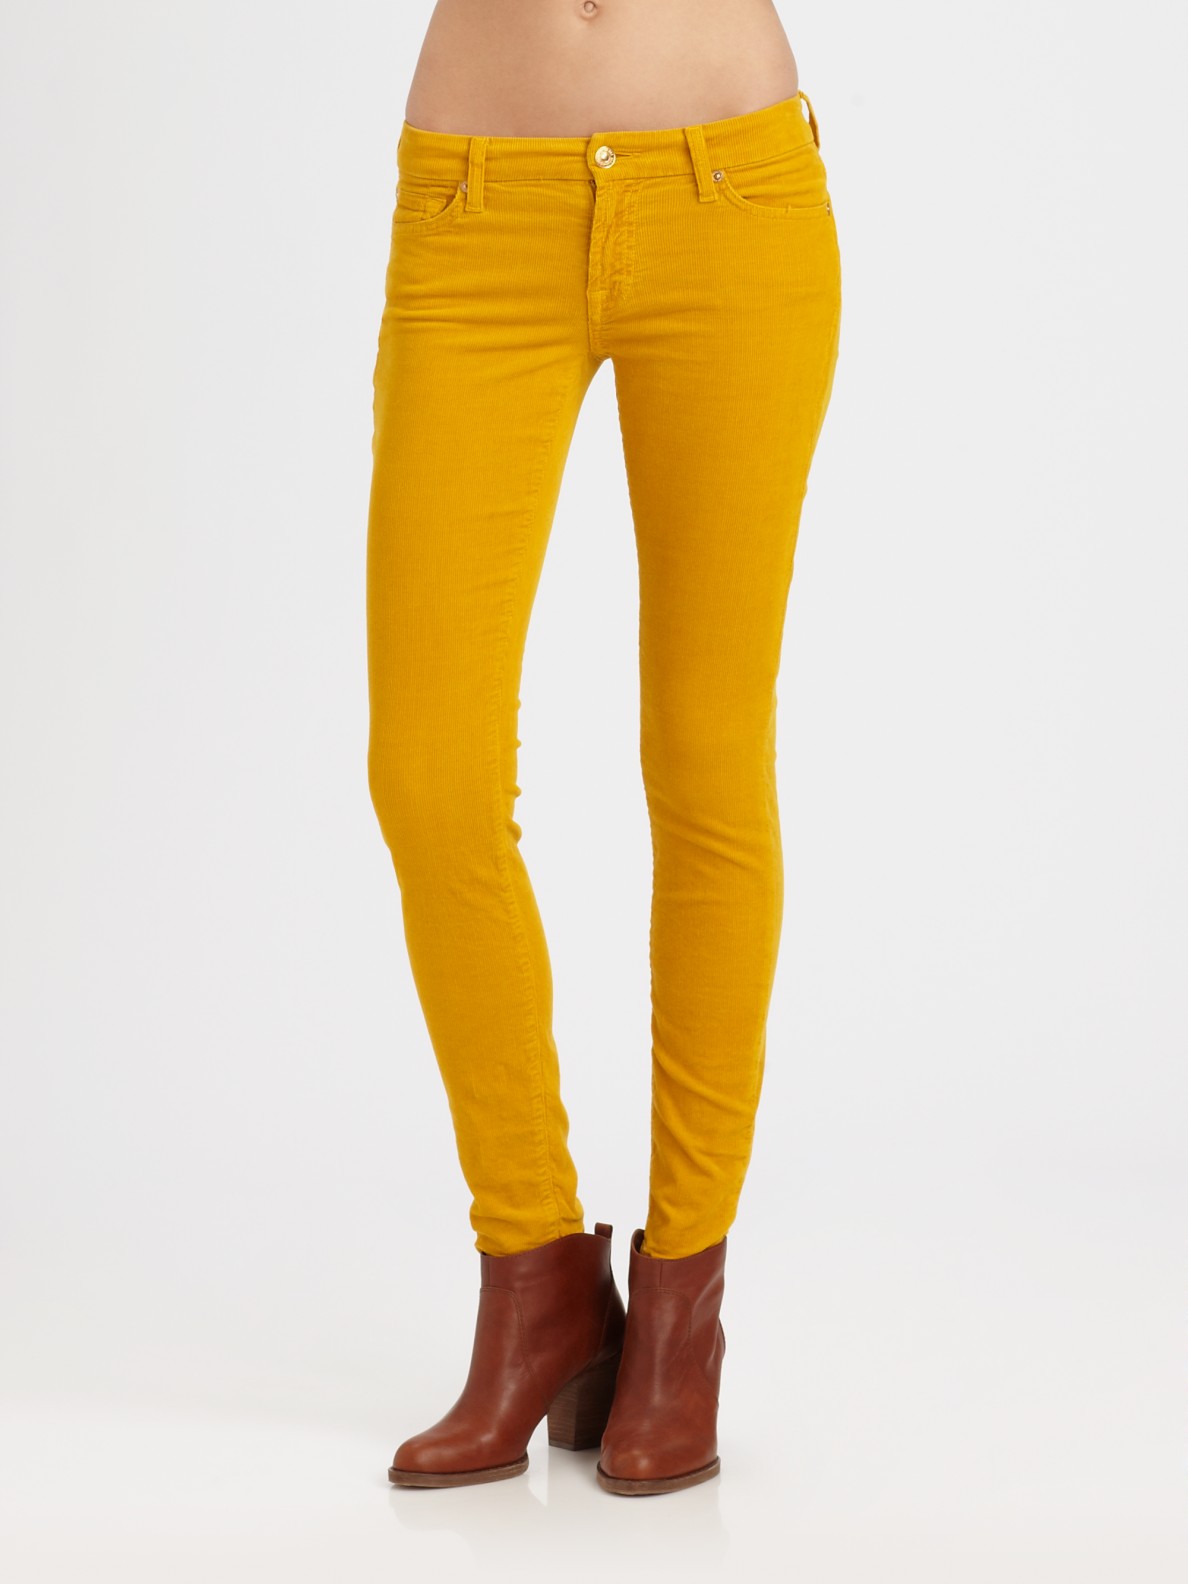 7 For All Mankind Luxe Corduroy Skinny Jeans in Black (Yellow) - Lyst